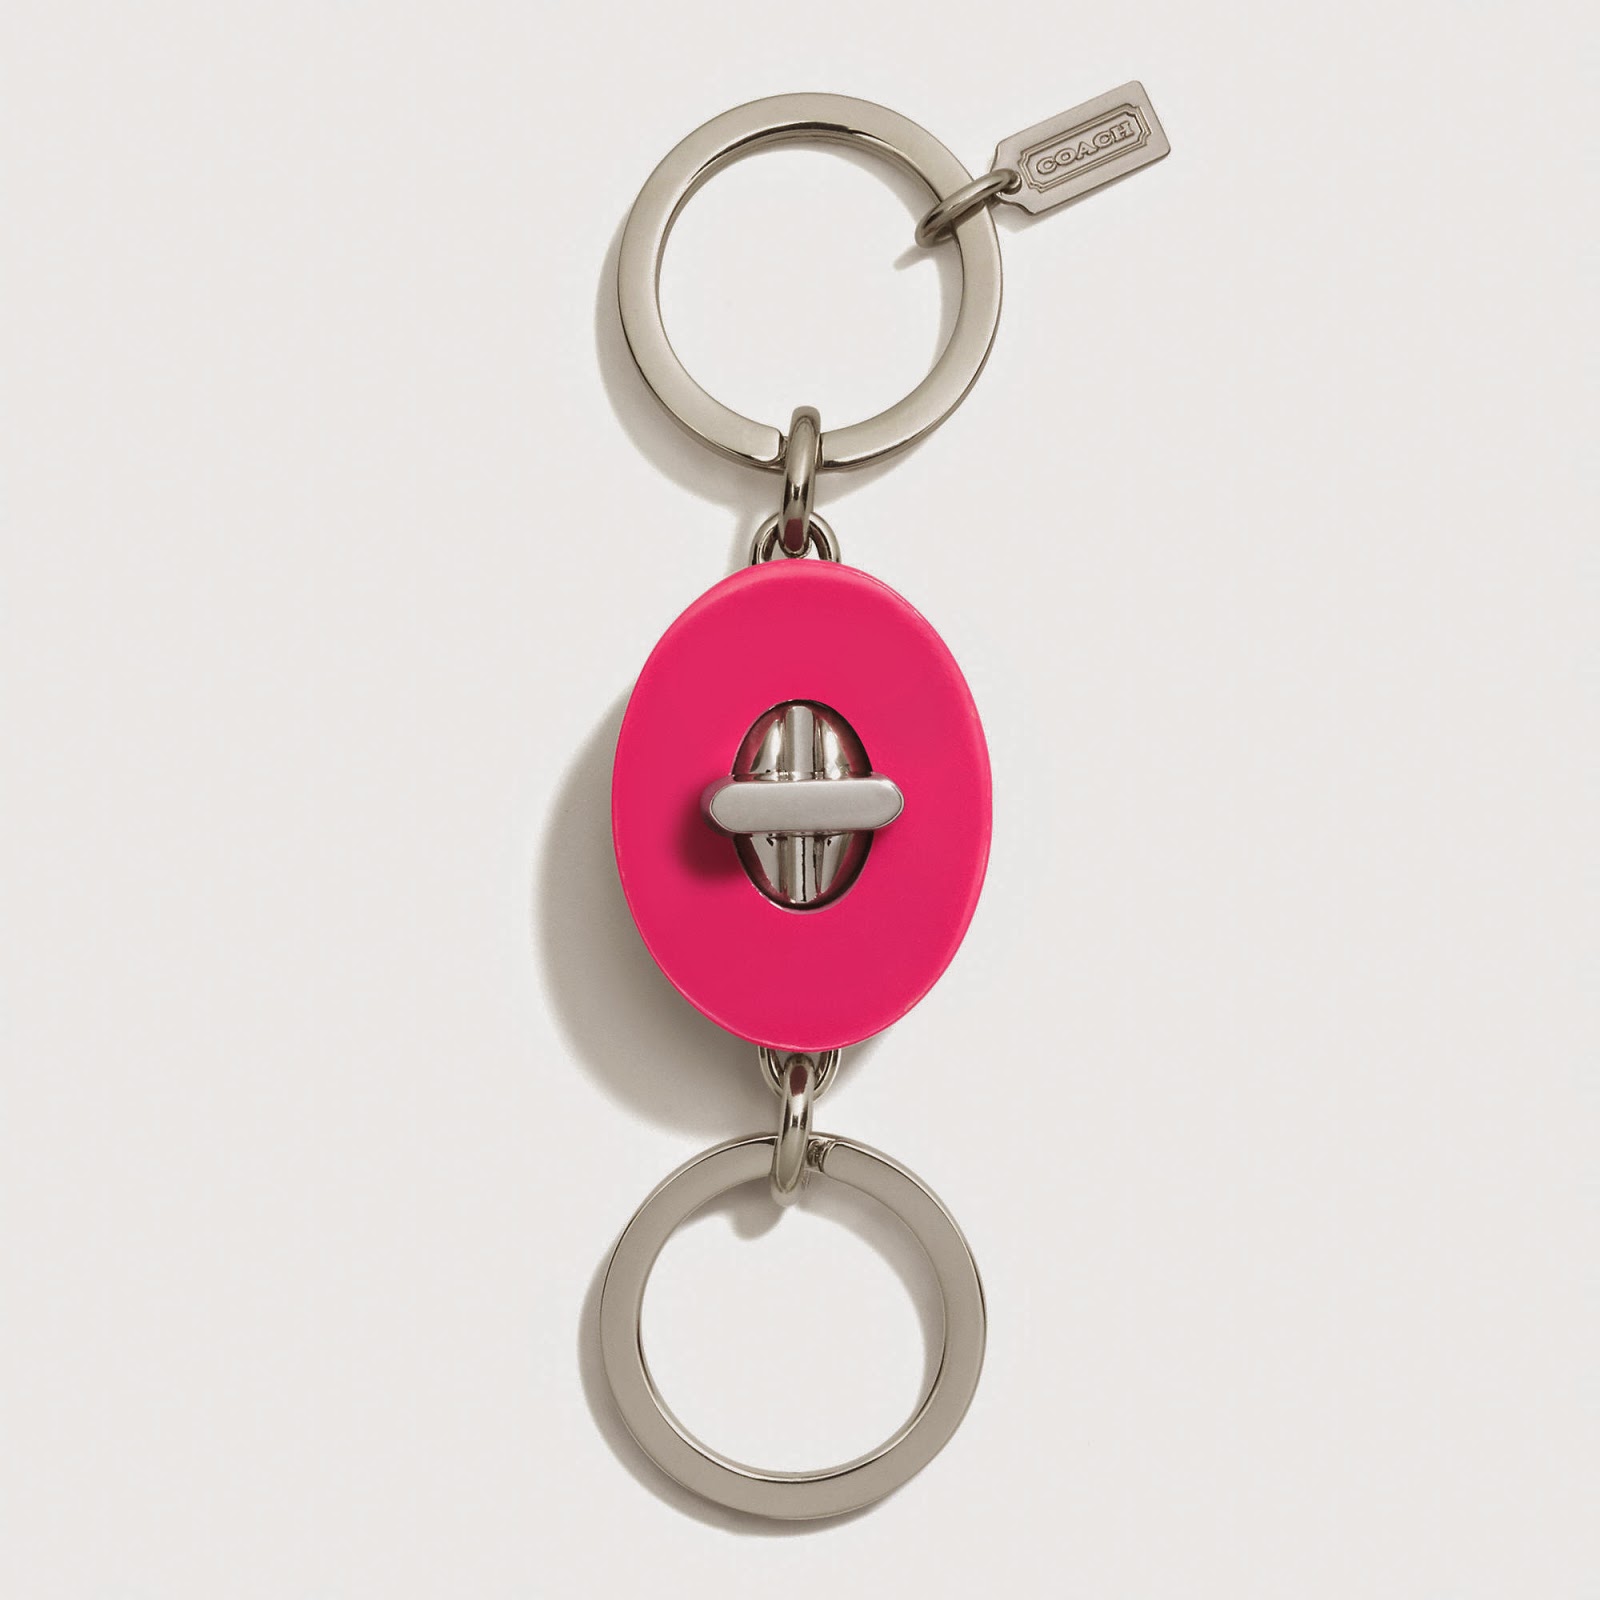 have also been loving this coach valet key ring